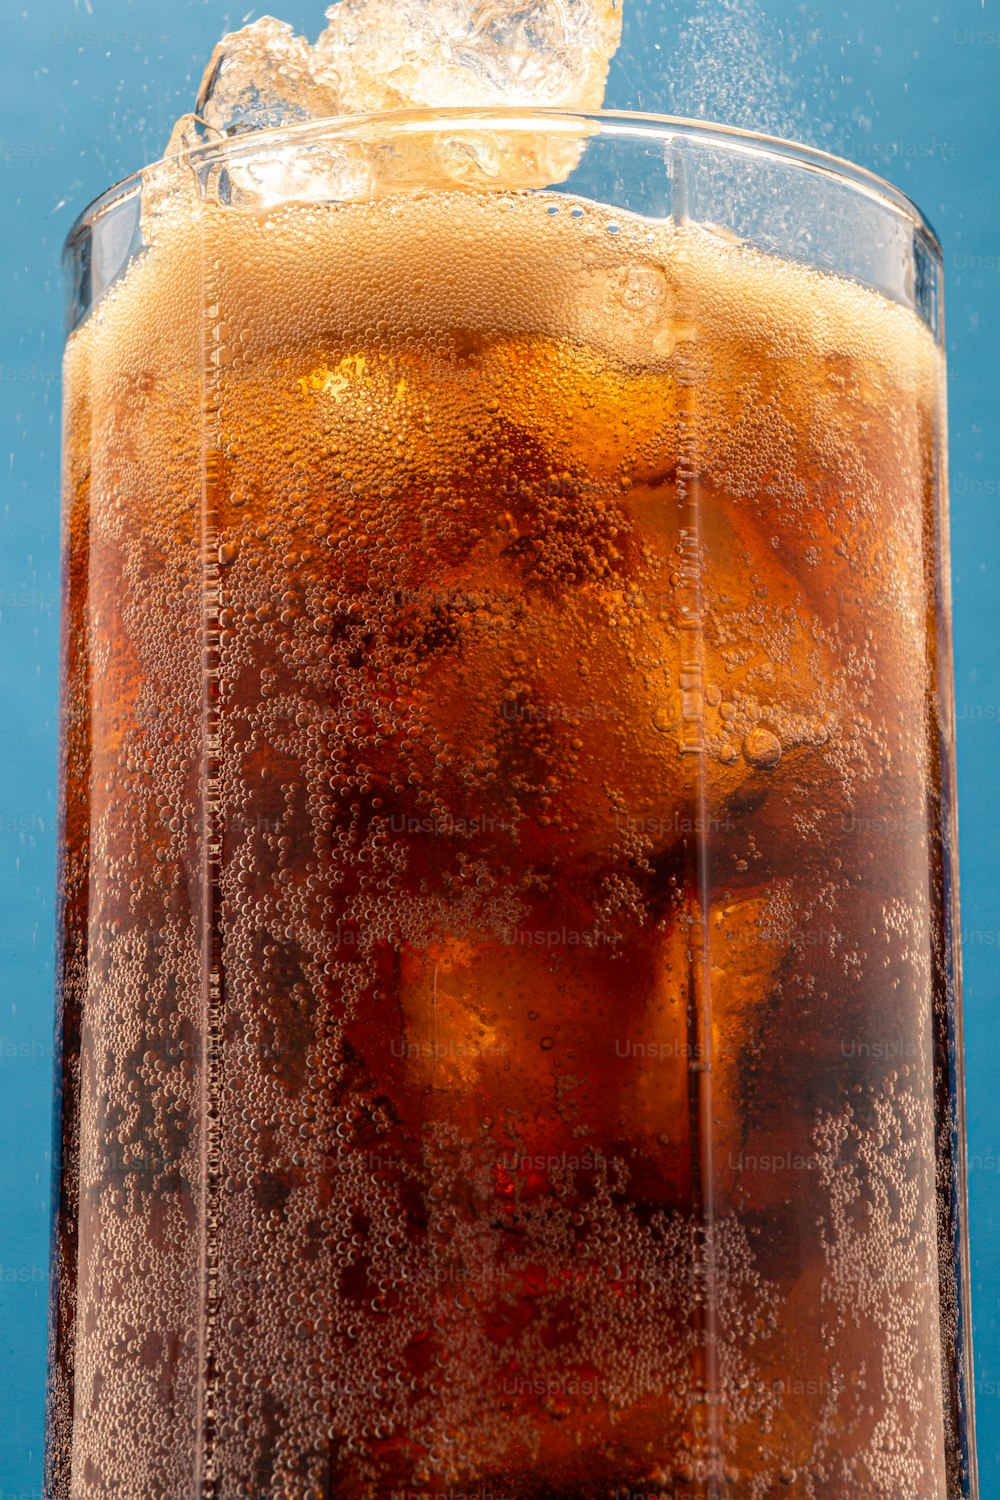 a close up of a glass of beer with ice